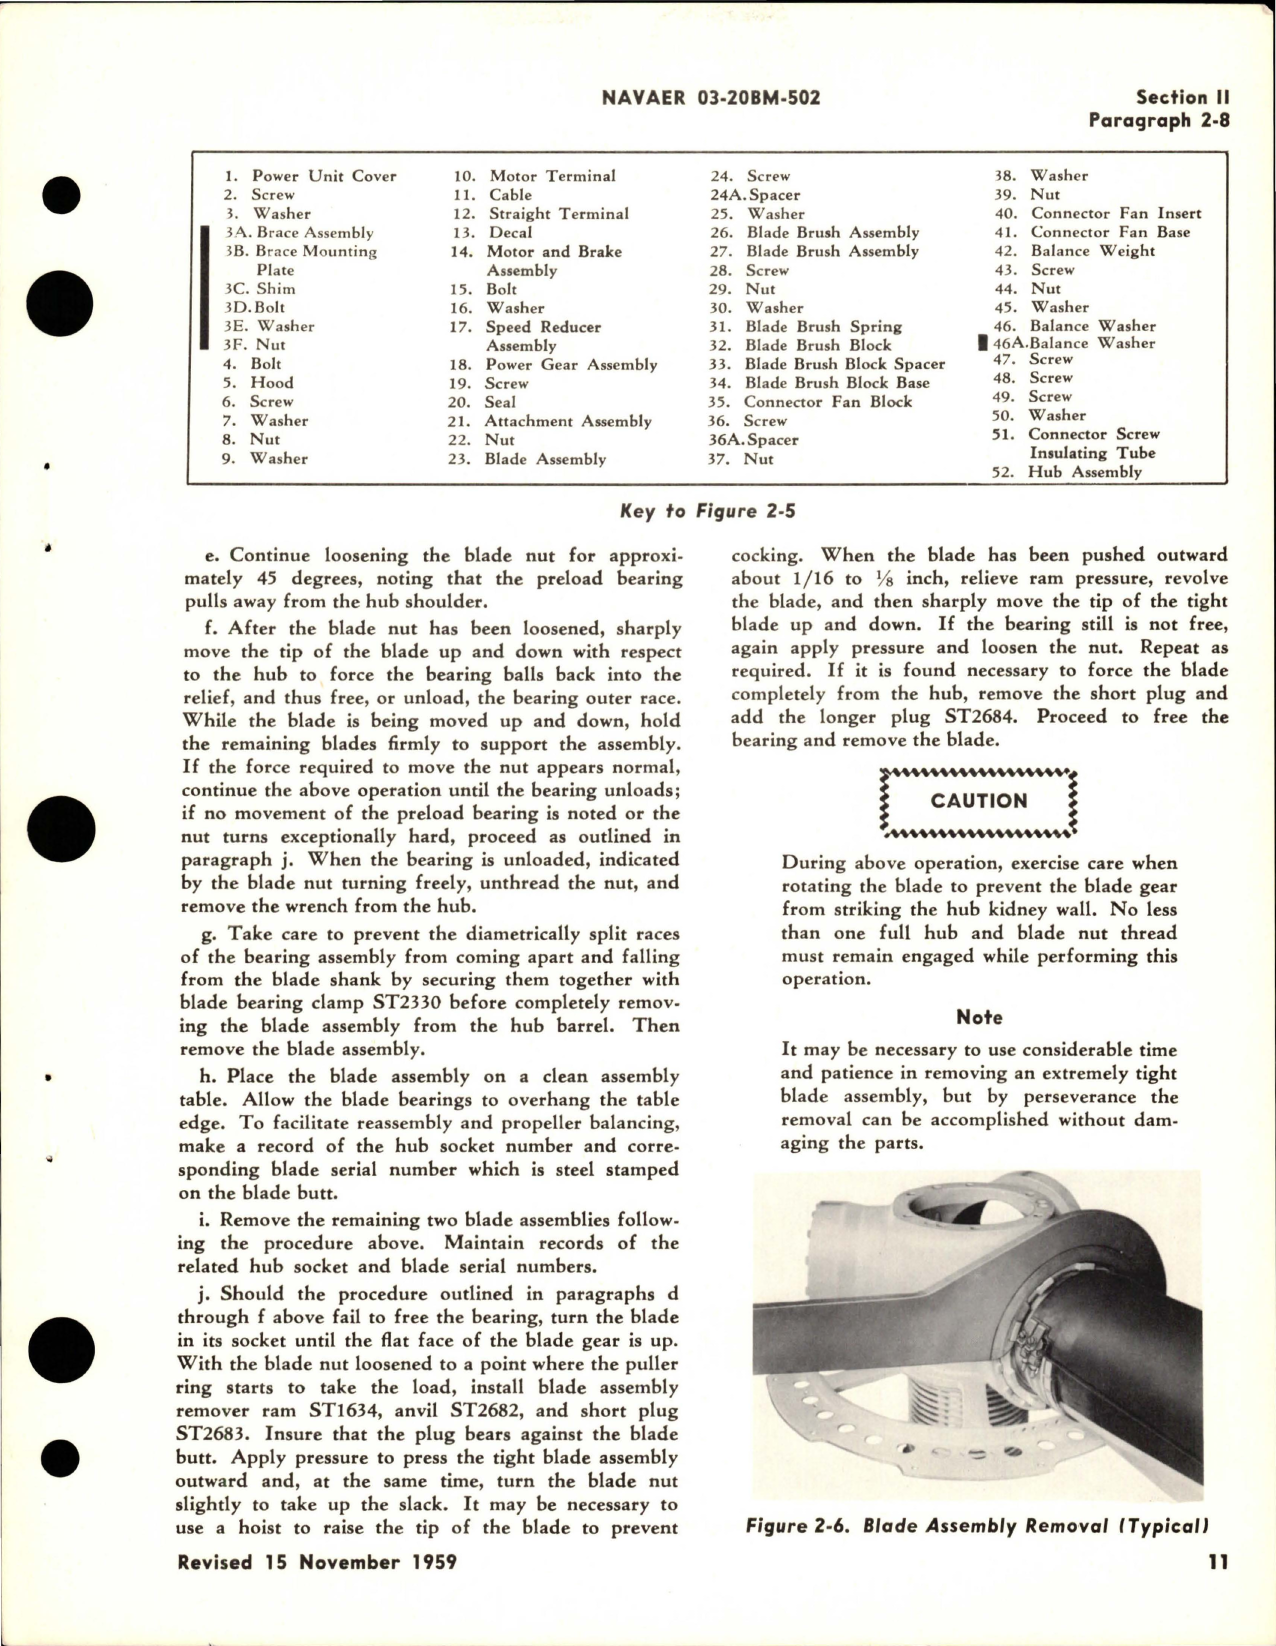 Sample page 5 from AirCorps Library document: Overhaul Instructions for Electric Propeller and Controls - C634S-C104 